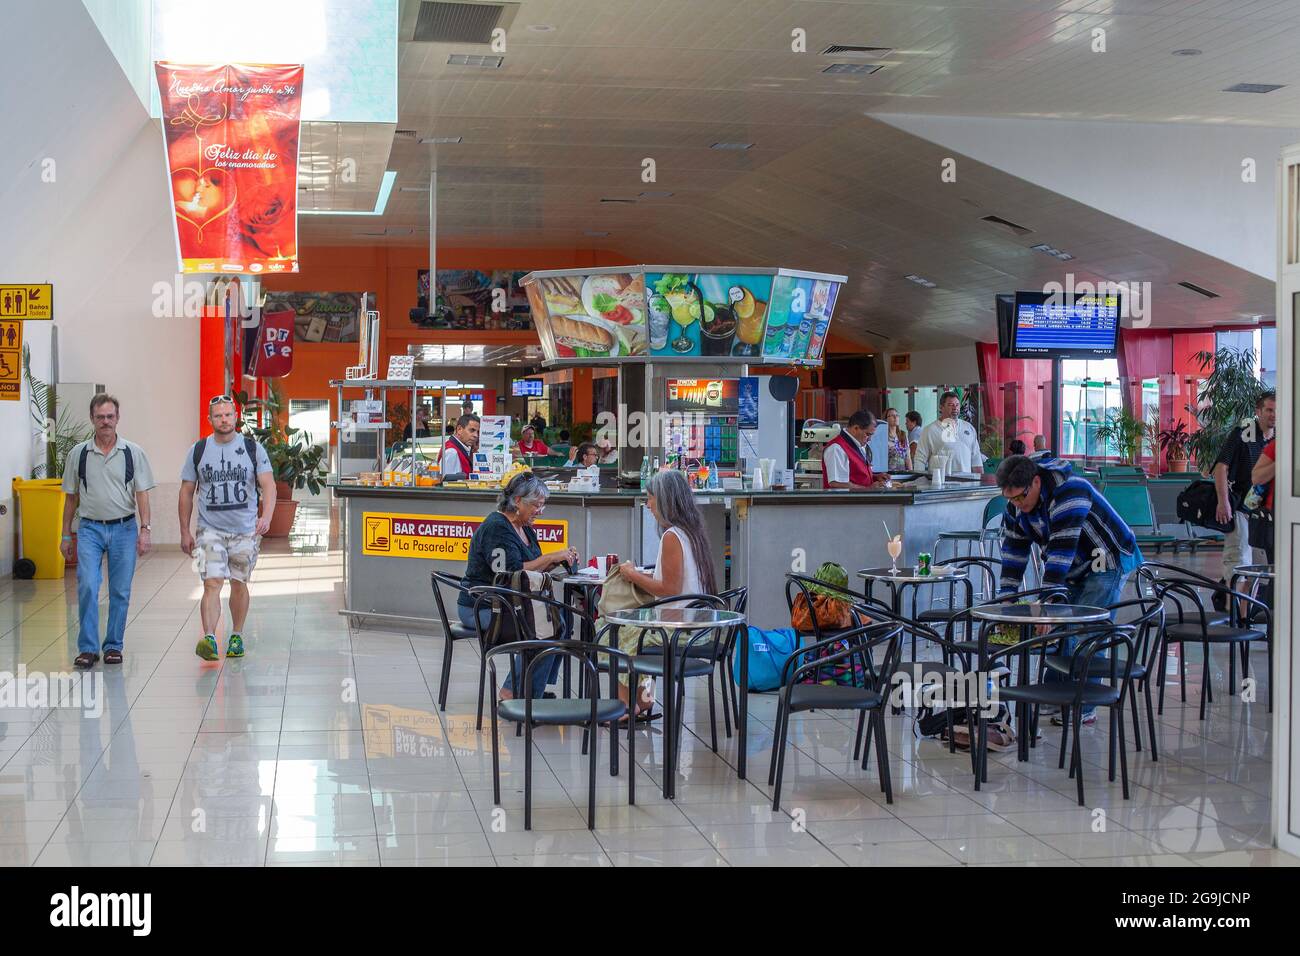 Varedero Airport Cafe Bar La Pasarela Serving Coffee And Beer To Passengers In The Departure Lounge Of Varadero Airport Cuba Stock Photo